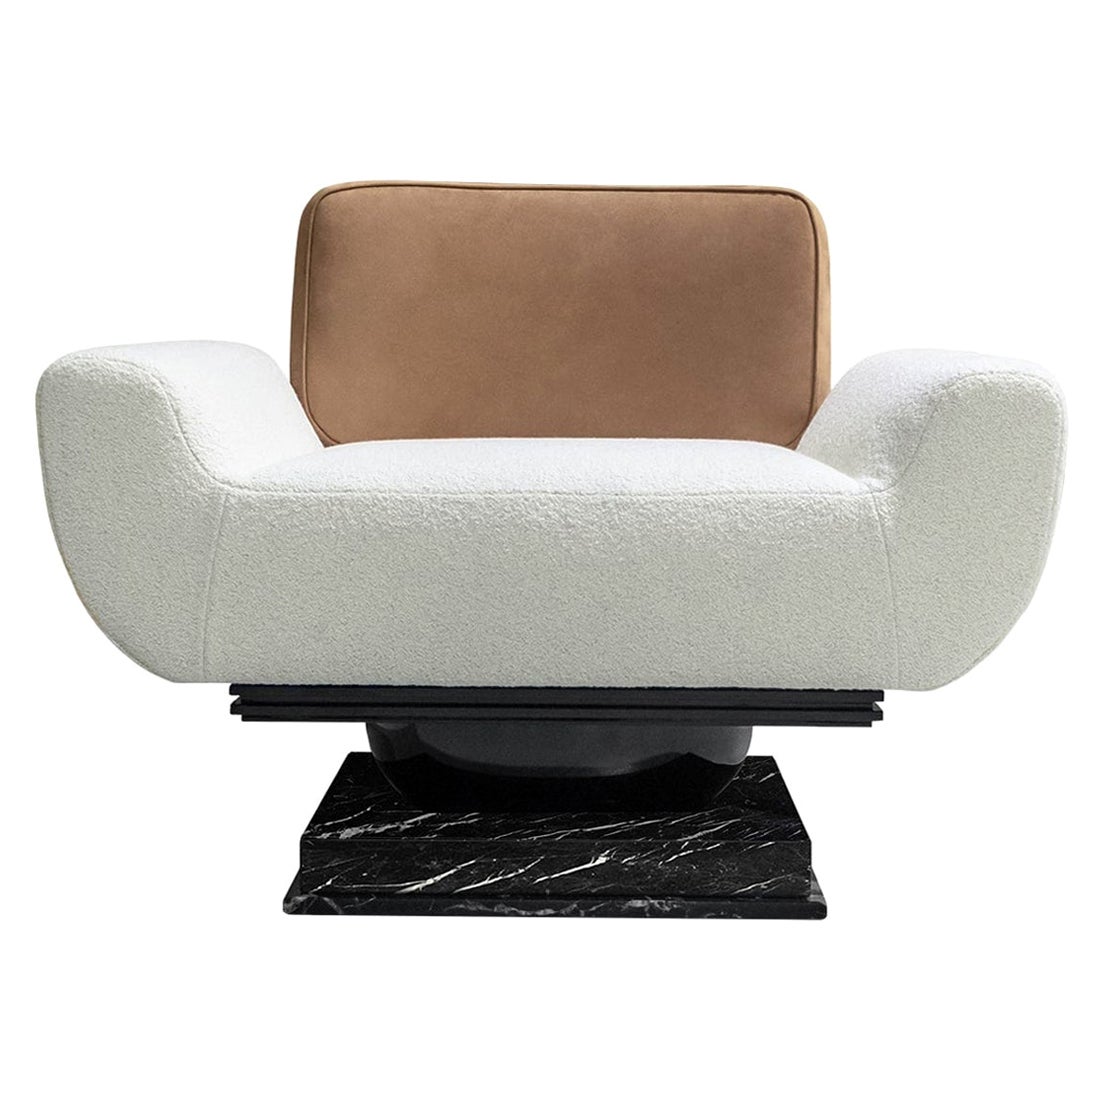 21st Century Modern Armchair Bouclé, Leather Upholstered & Nero Marquina Marble